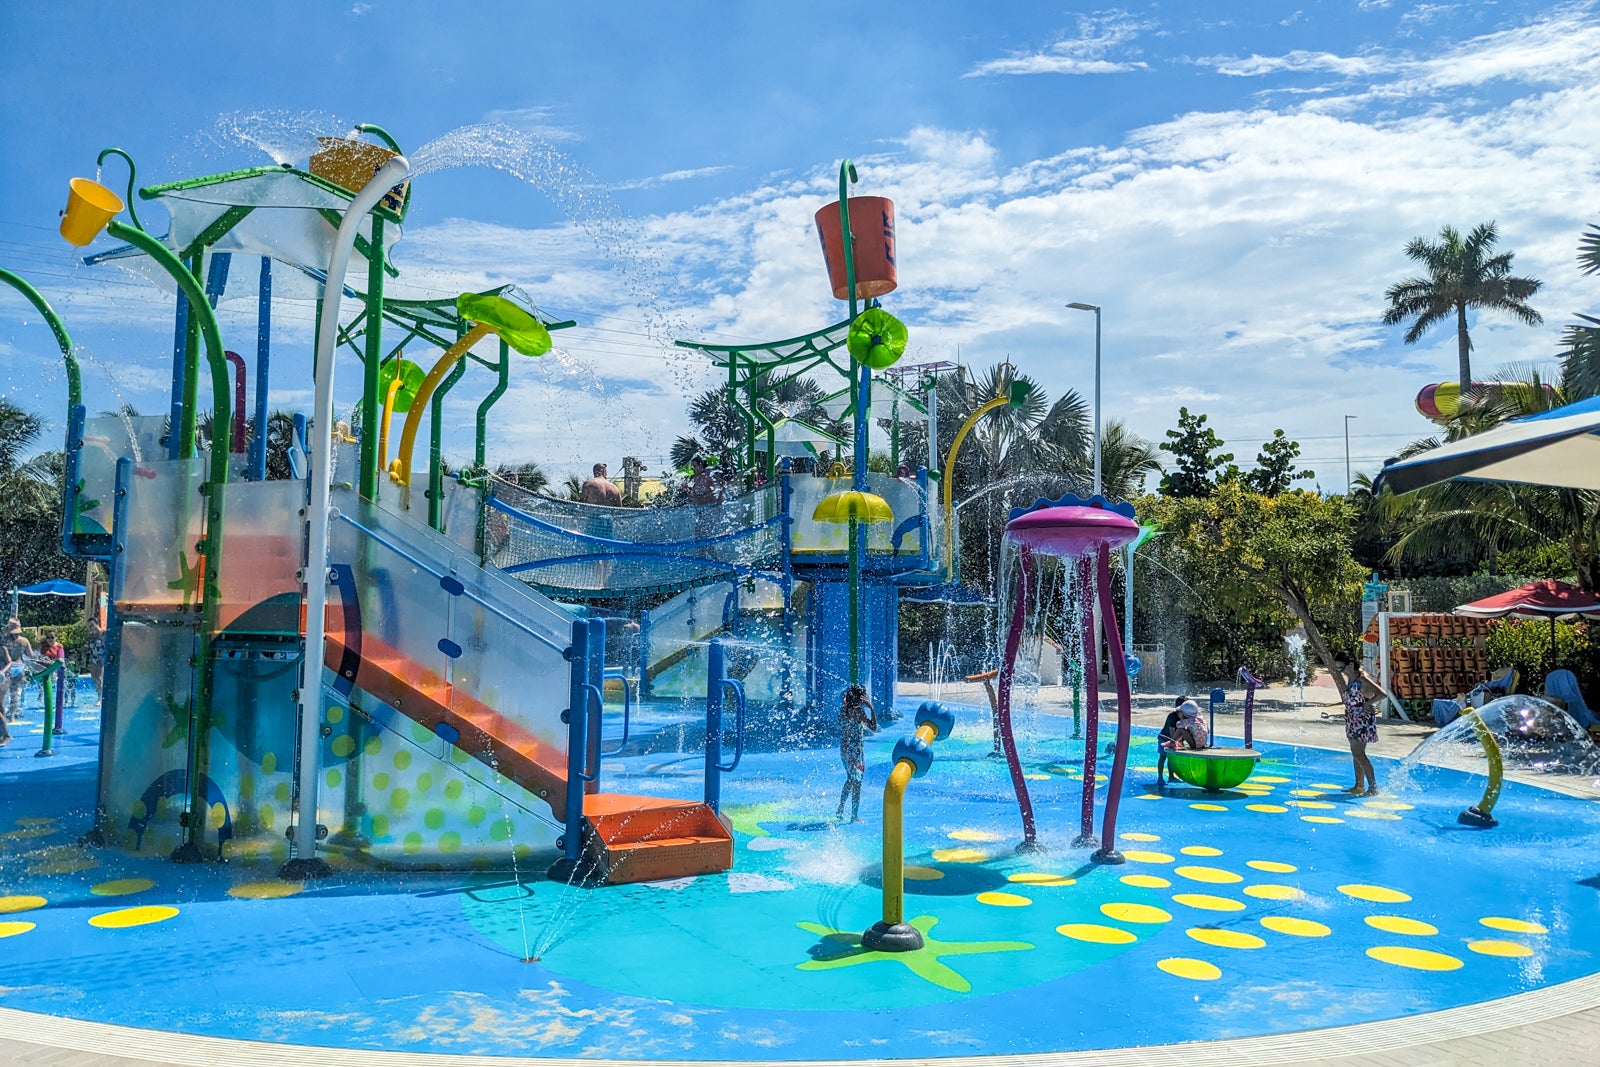 cococay excursions cost